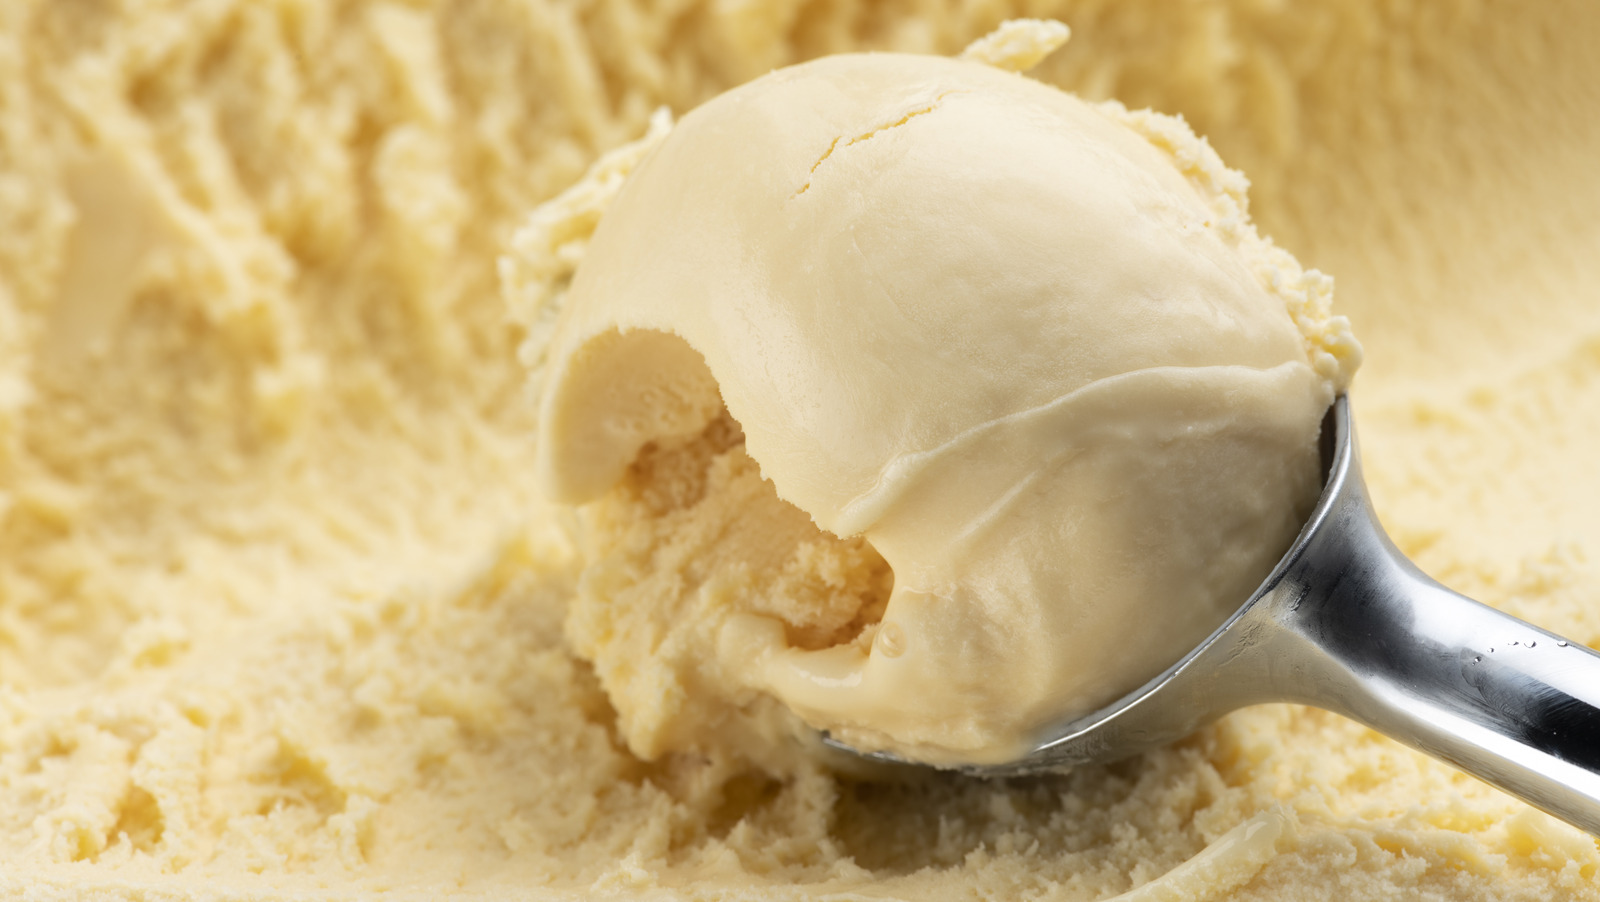 https://www.tastingtable.com/img/gallery/the-sharp-trick-for-softening-ice-cream-much-faster/l-intro-1684162275.jpg